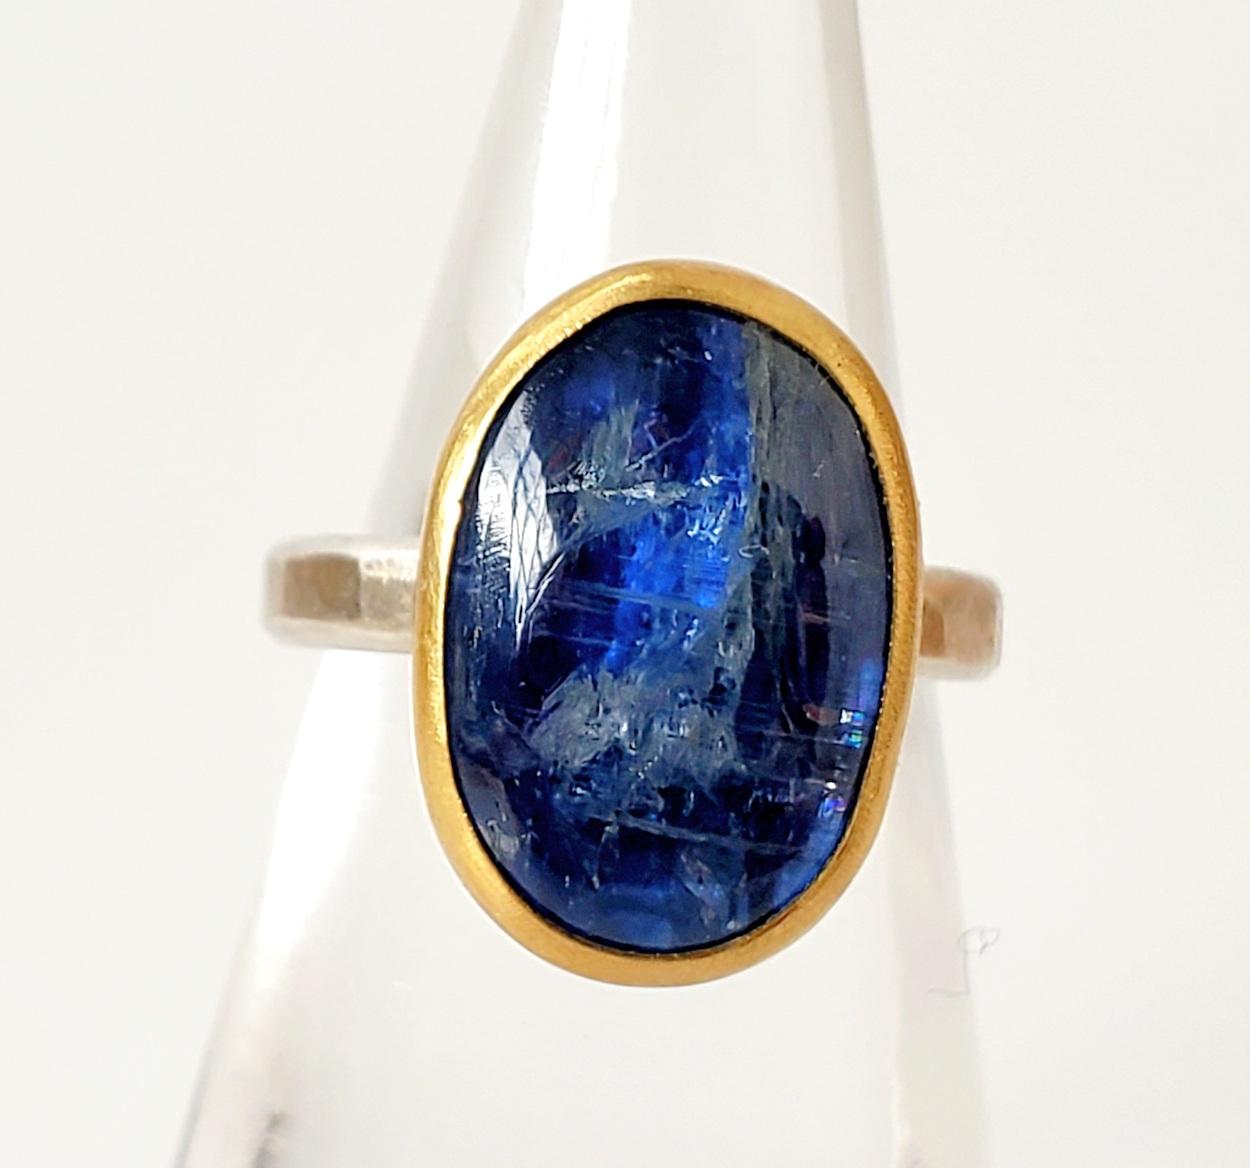 Solitaire ring featuring a deep, marine blue oval kyanite cabochon; hand set in a 22K gold bezel, sterling silver back and band. Blue kyanite: 9.4 carats. Size 6.

he Metaphysical Particulars: Blue kyanite helps to rebalance one’s energy and is